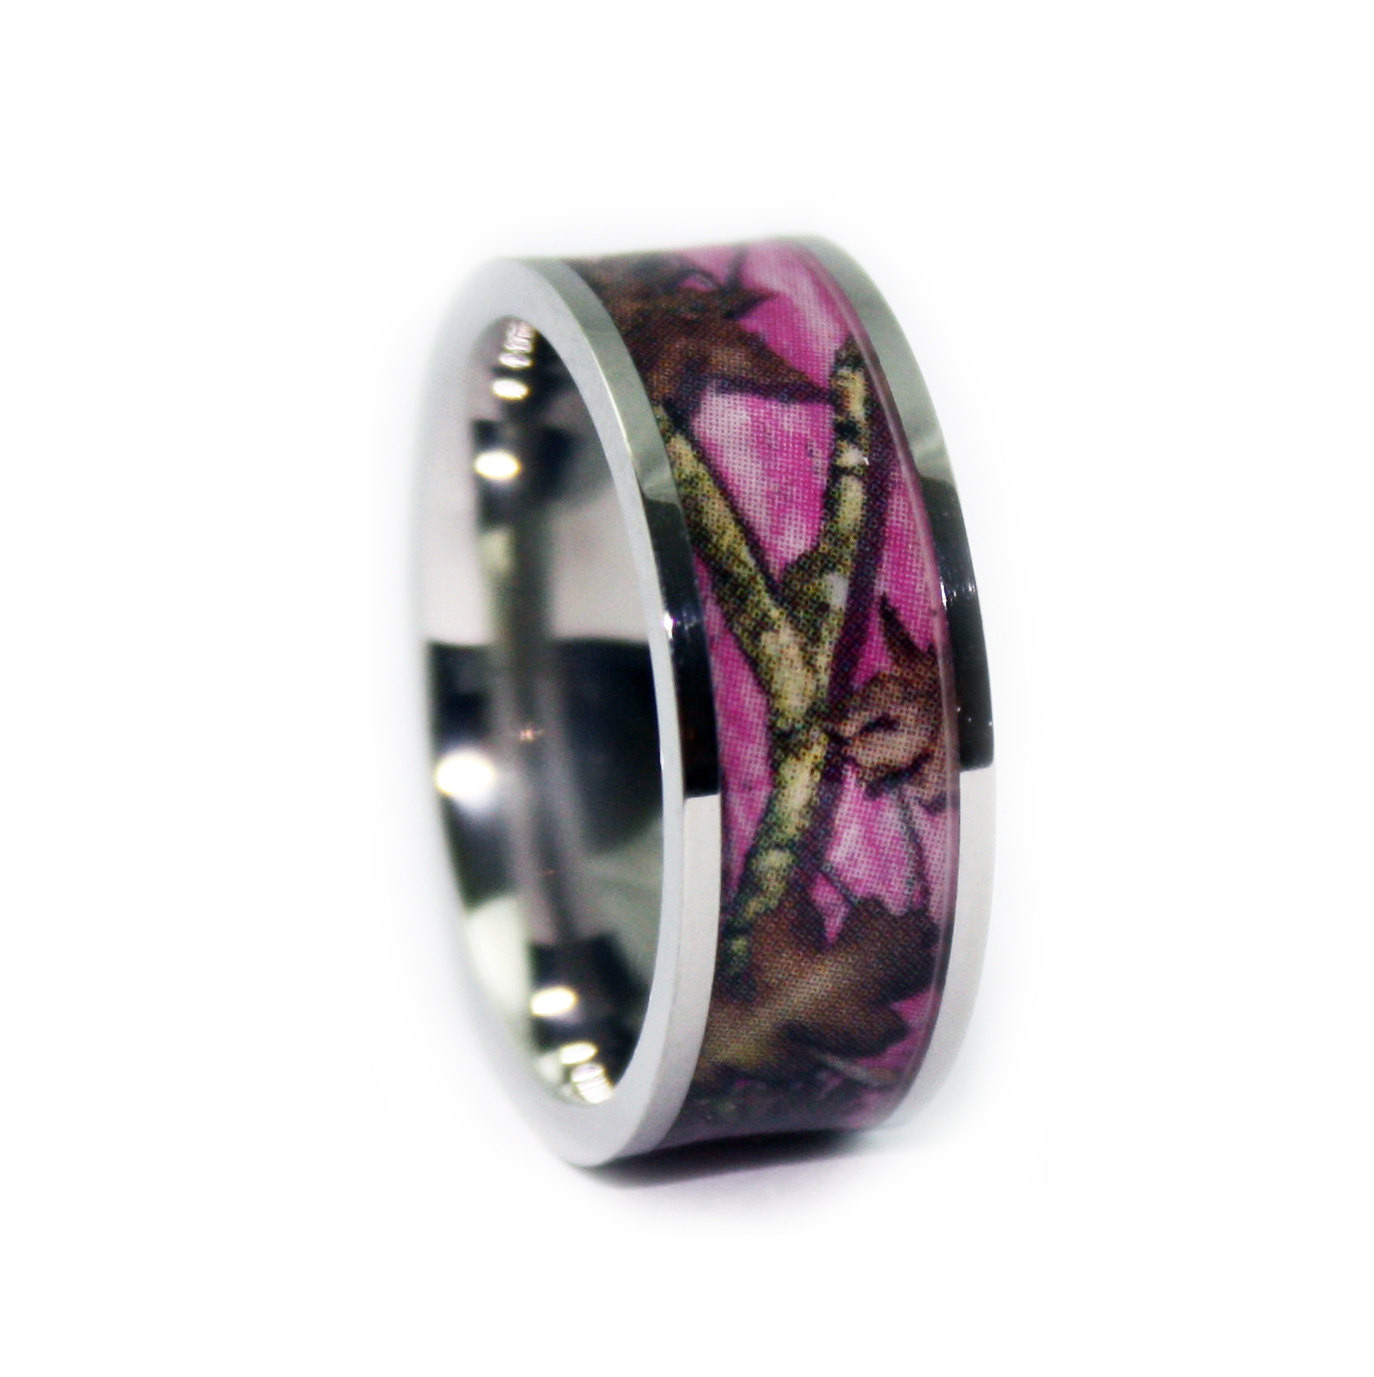 Pink Camo Wedding Rings For Her
 Request a custom order and have something made just for you